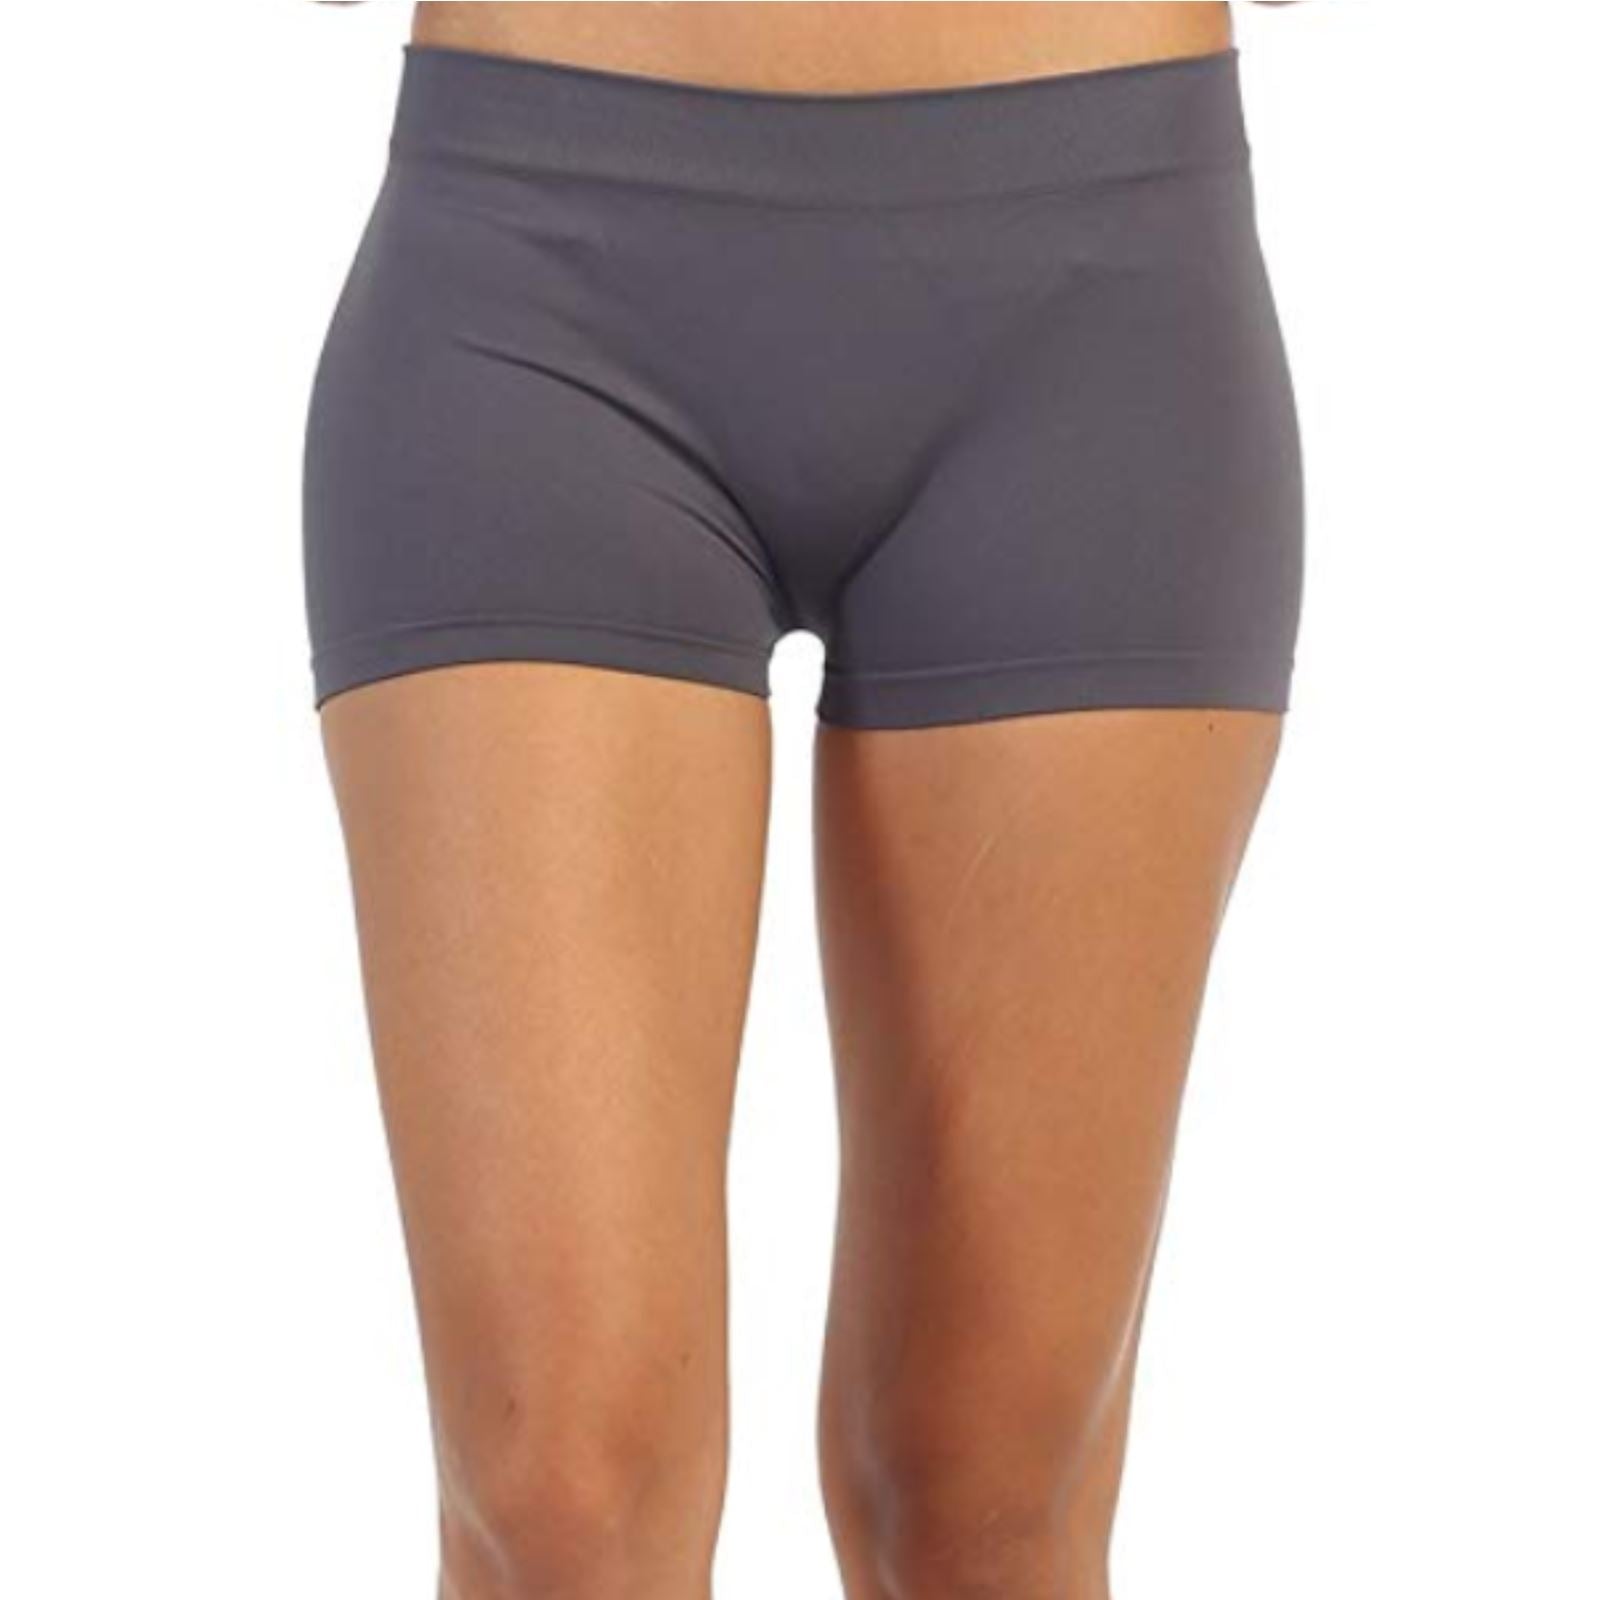 OUTLET Shorts corrective seamless, low